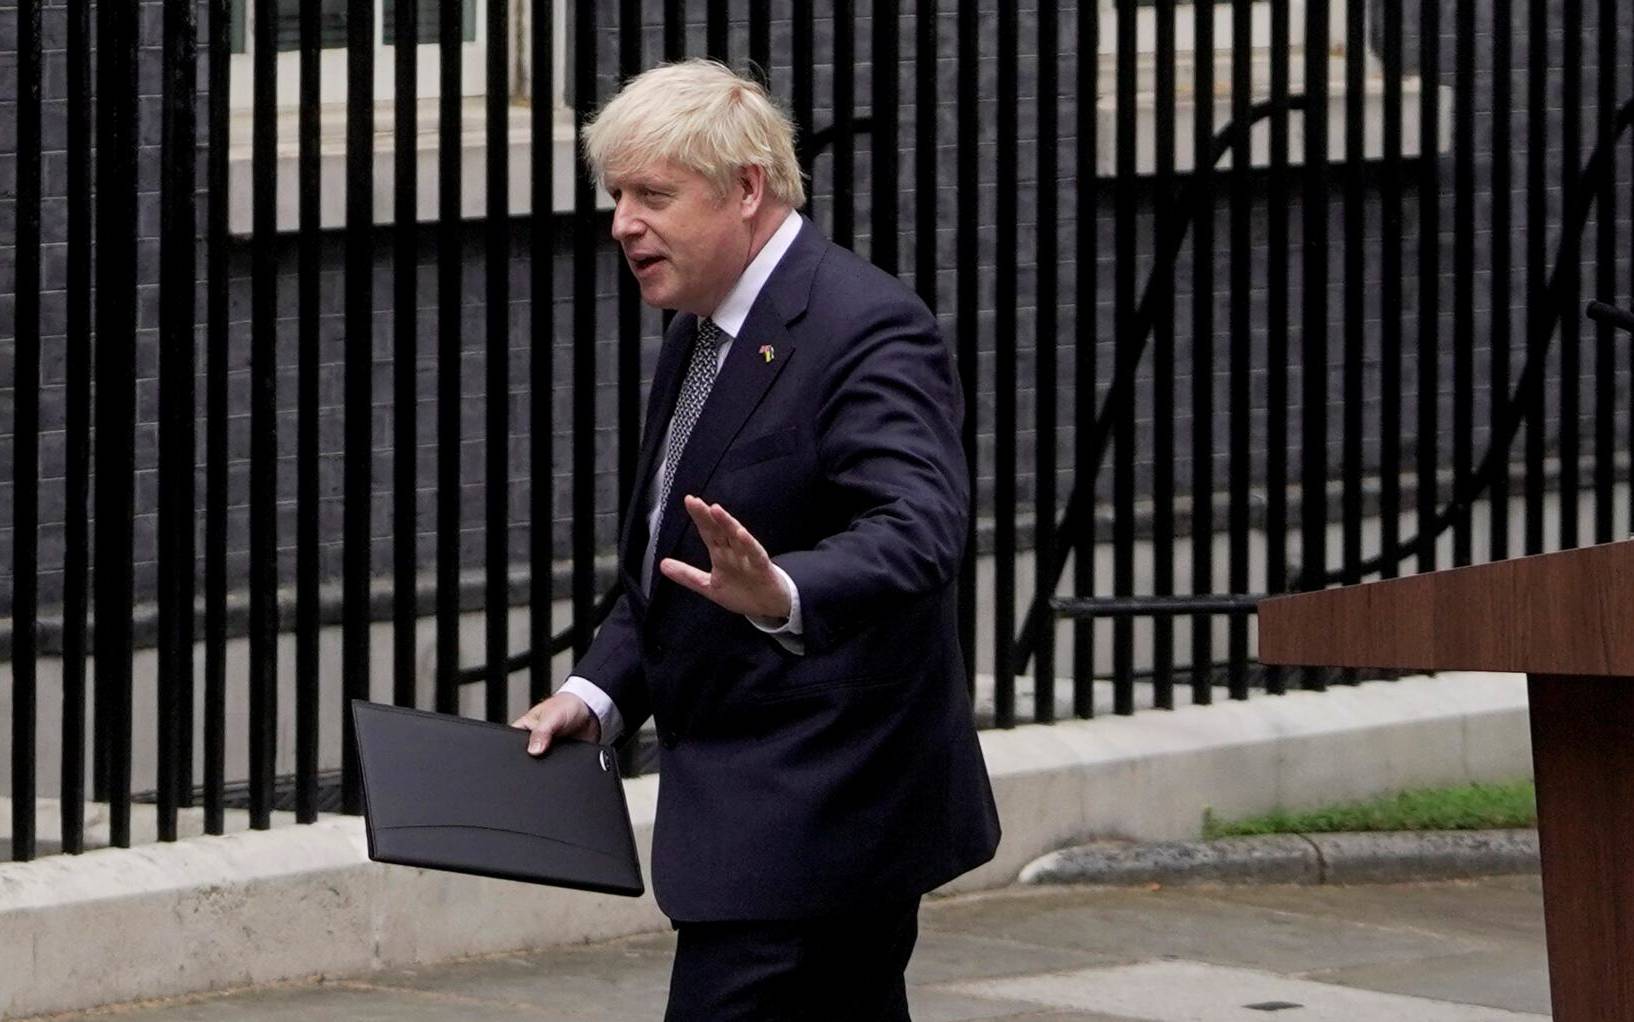 Britain's Prime Minister Boris Johnson leaves after making a statement in front of 10 Downing Street in central London on July 7, 2022. - Johnson quit as Conservative party leader, after three tumultuous years in charge marked by Brexit, Covid and mounting scandals. (Photo by Niklas HALLE'N / AFP)